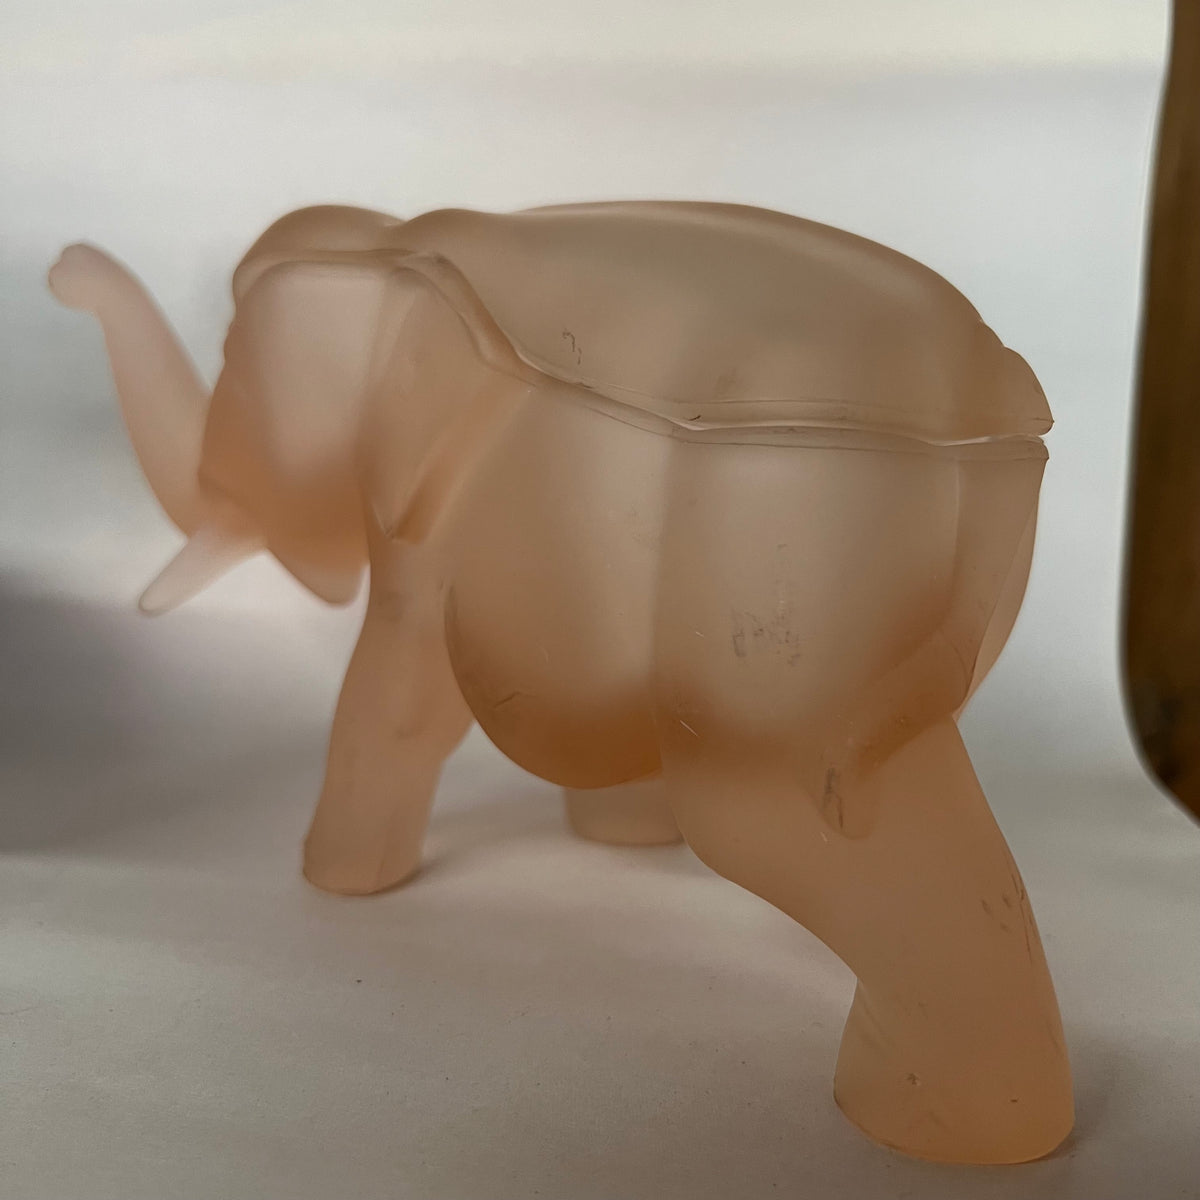 Made by Indiana Glass for Tiara, this glass elephant lidded trinket box is as unique as it is functional. Perfect for everything from buttons to jewelry to candy and more. Dates to the 1980s.